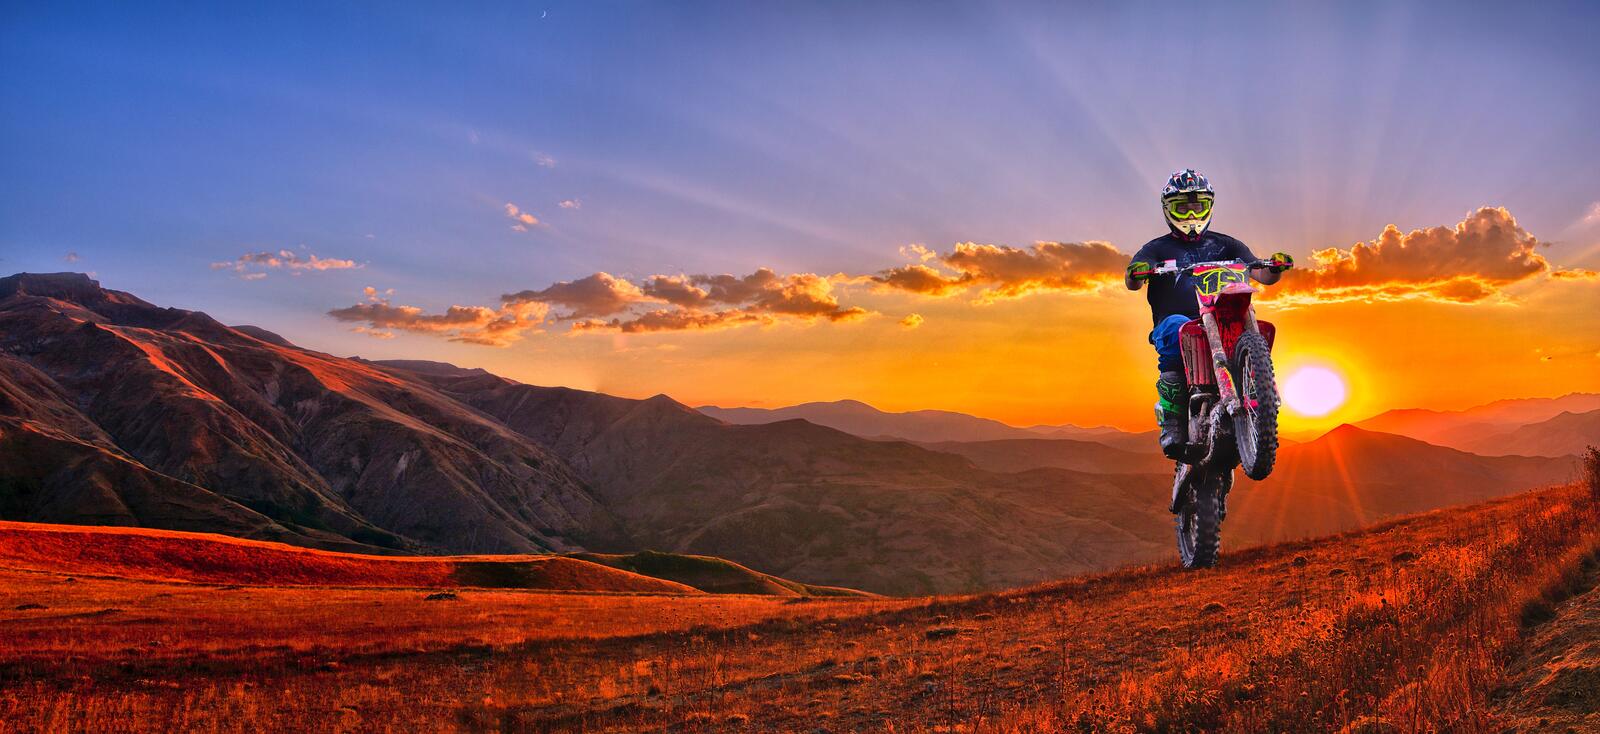 Wallpapers sunset mountains motorcyclist on the desktop